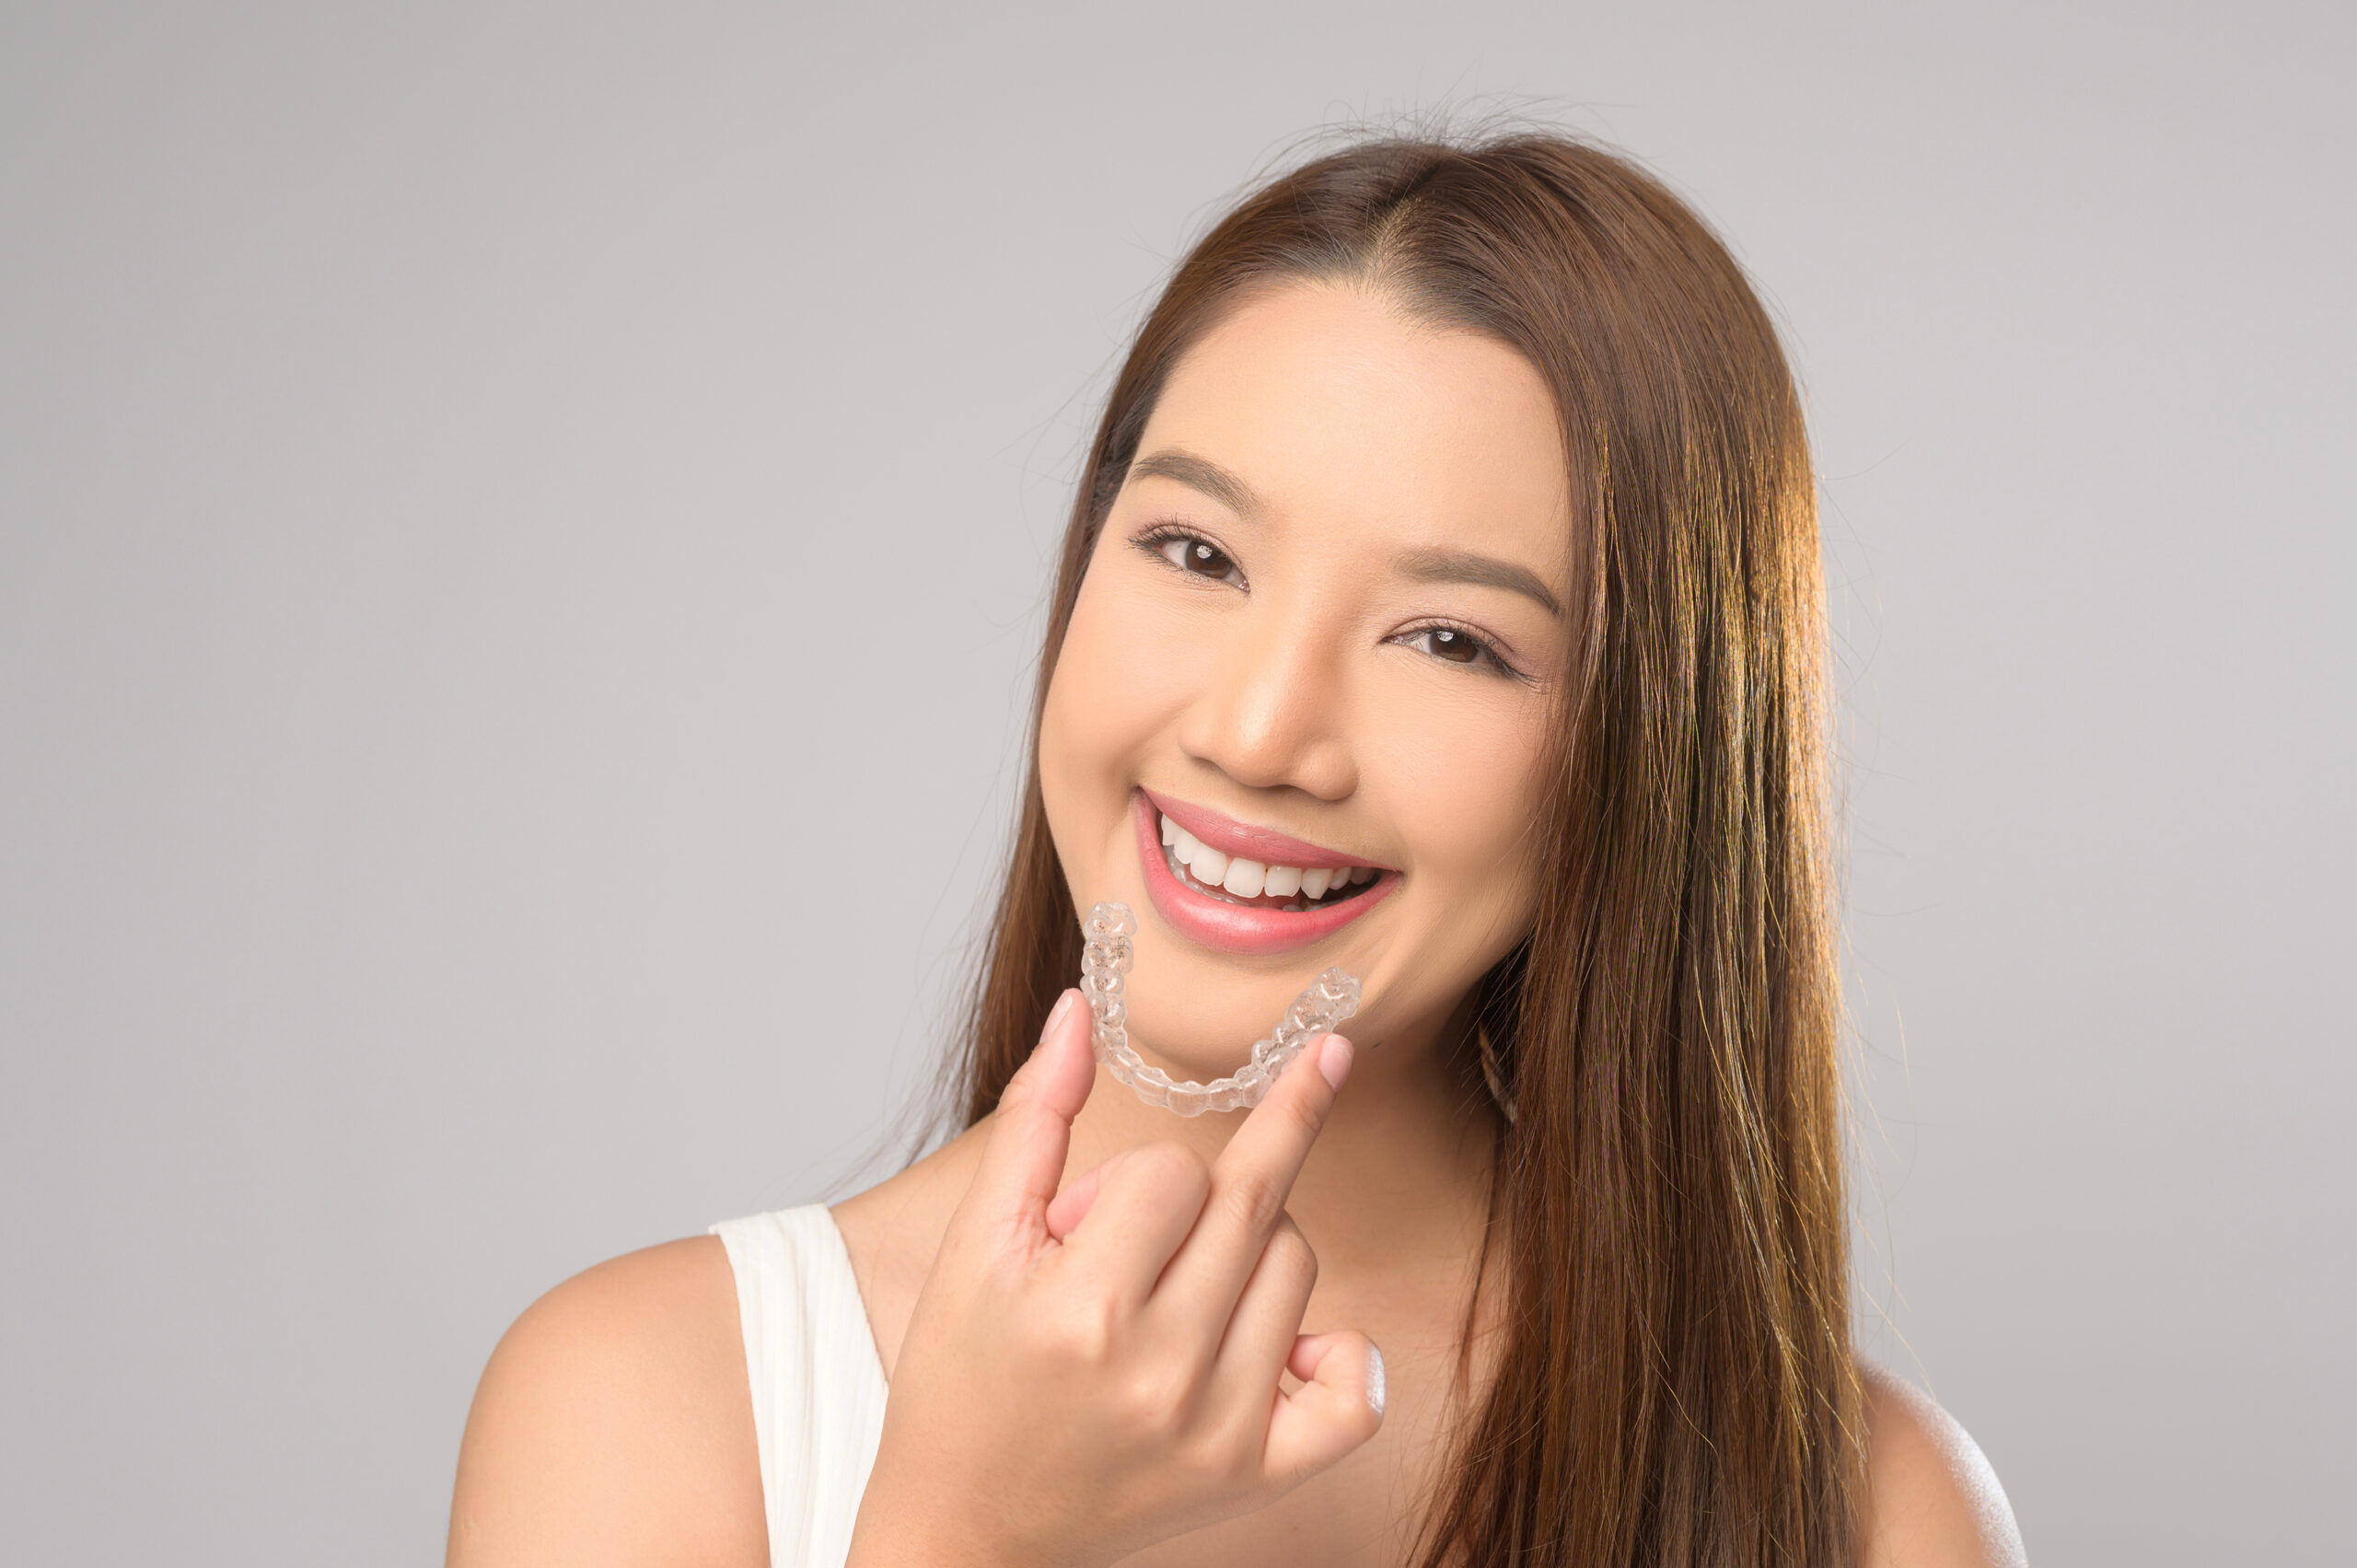 A Young smiling woman holding invisalign braces over white background studio, dental healthcare and Orthodontic concept.